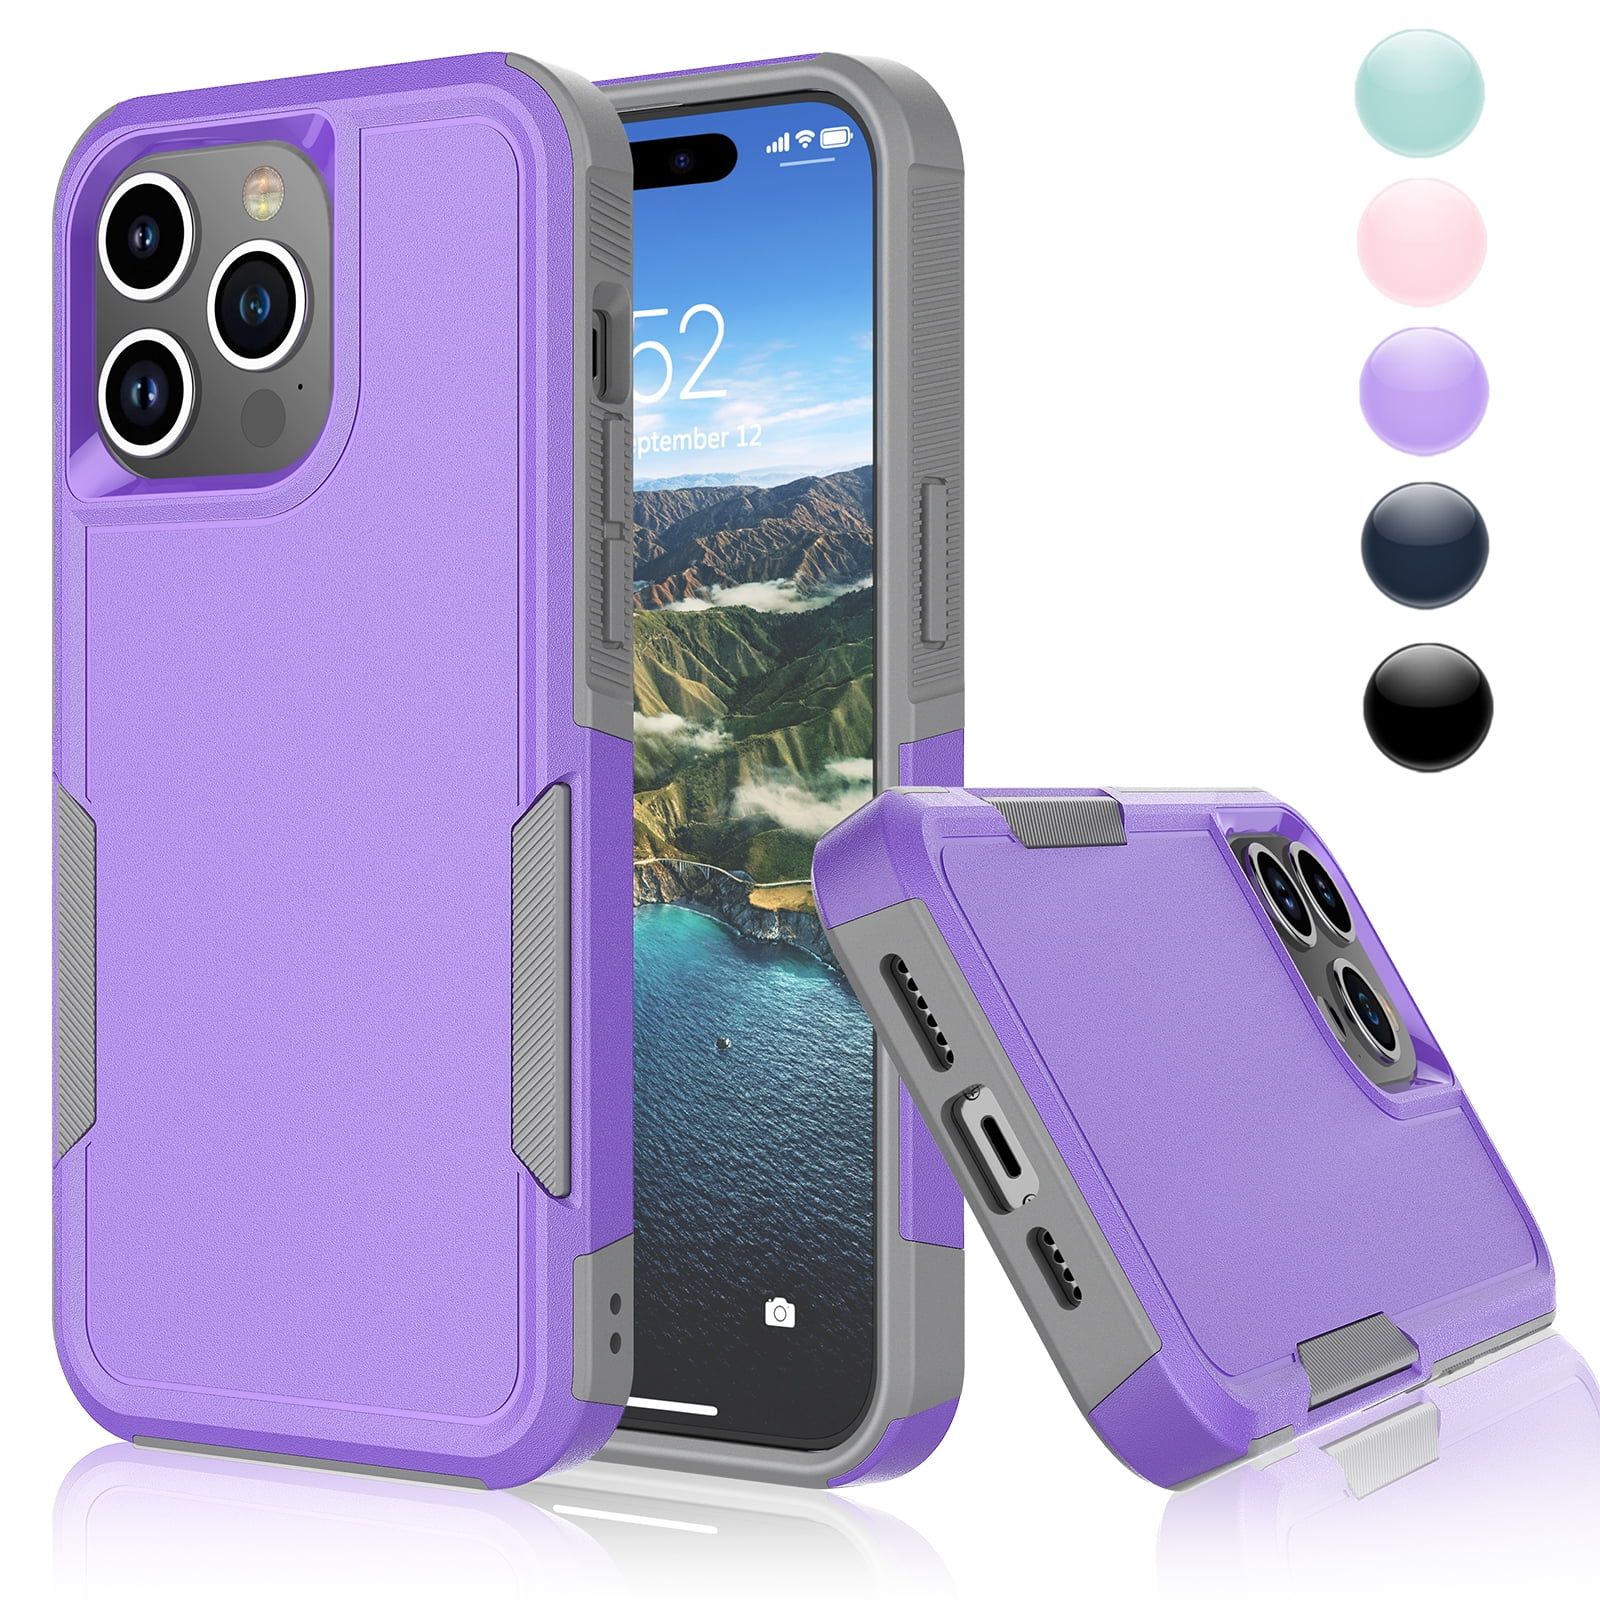 APPLE, Iphone 15-15 pro max / 14-14 pro max-pro case, Cases, Covers & Skins